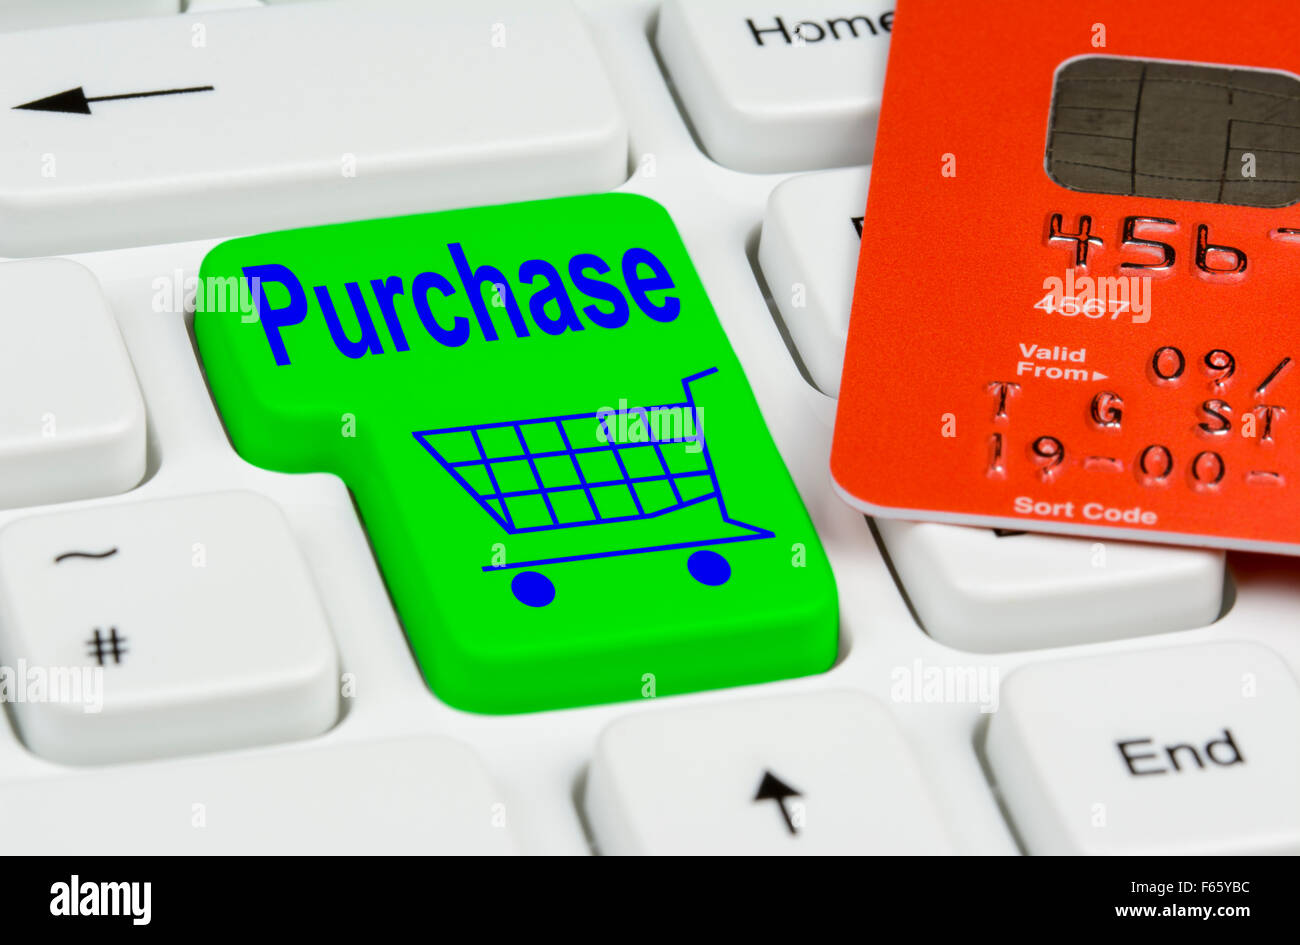 Online shopping button on a computer keyboard.with debit or credit card ready for payment. Stock Photo